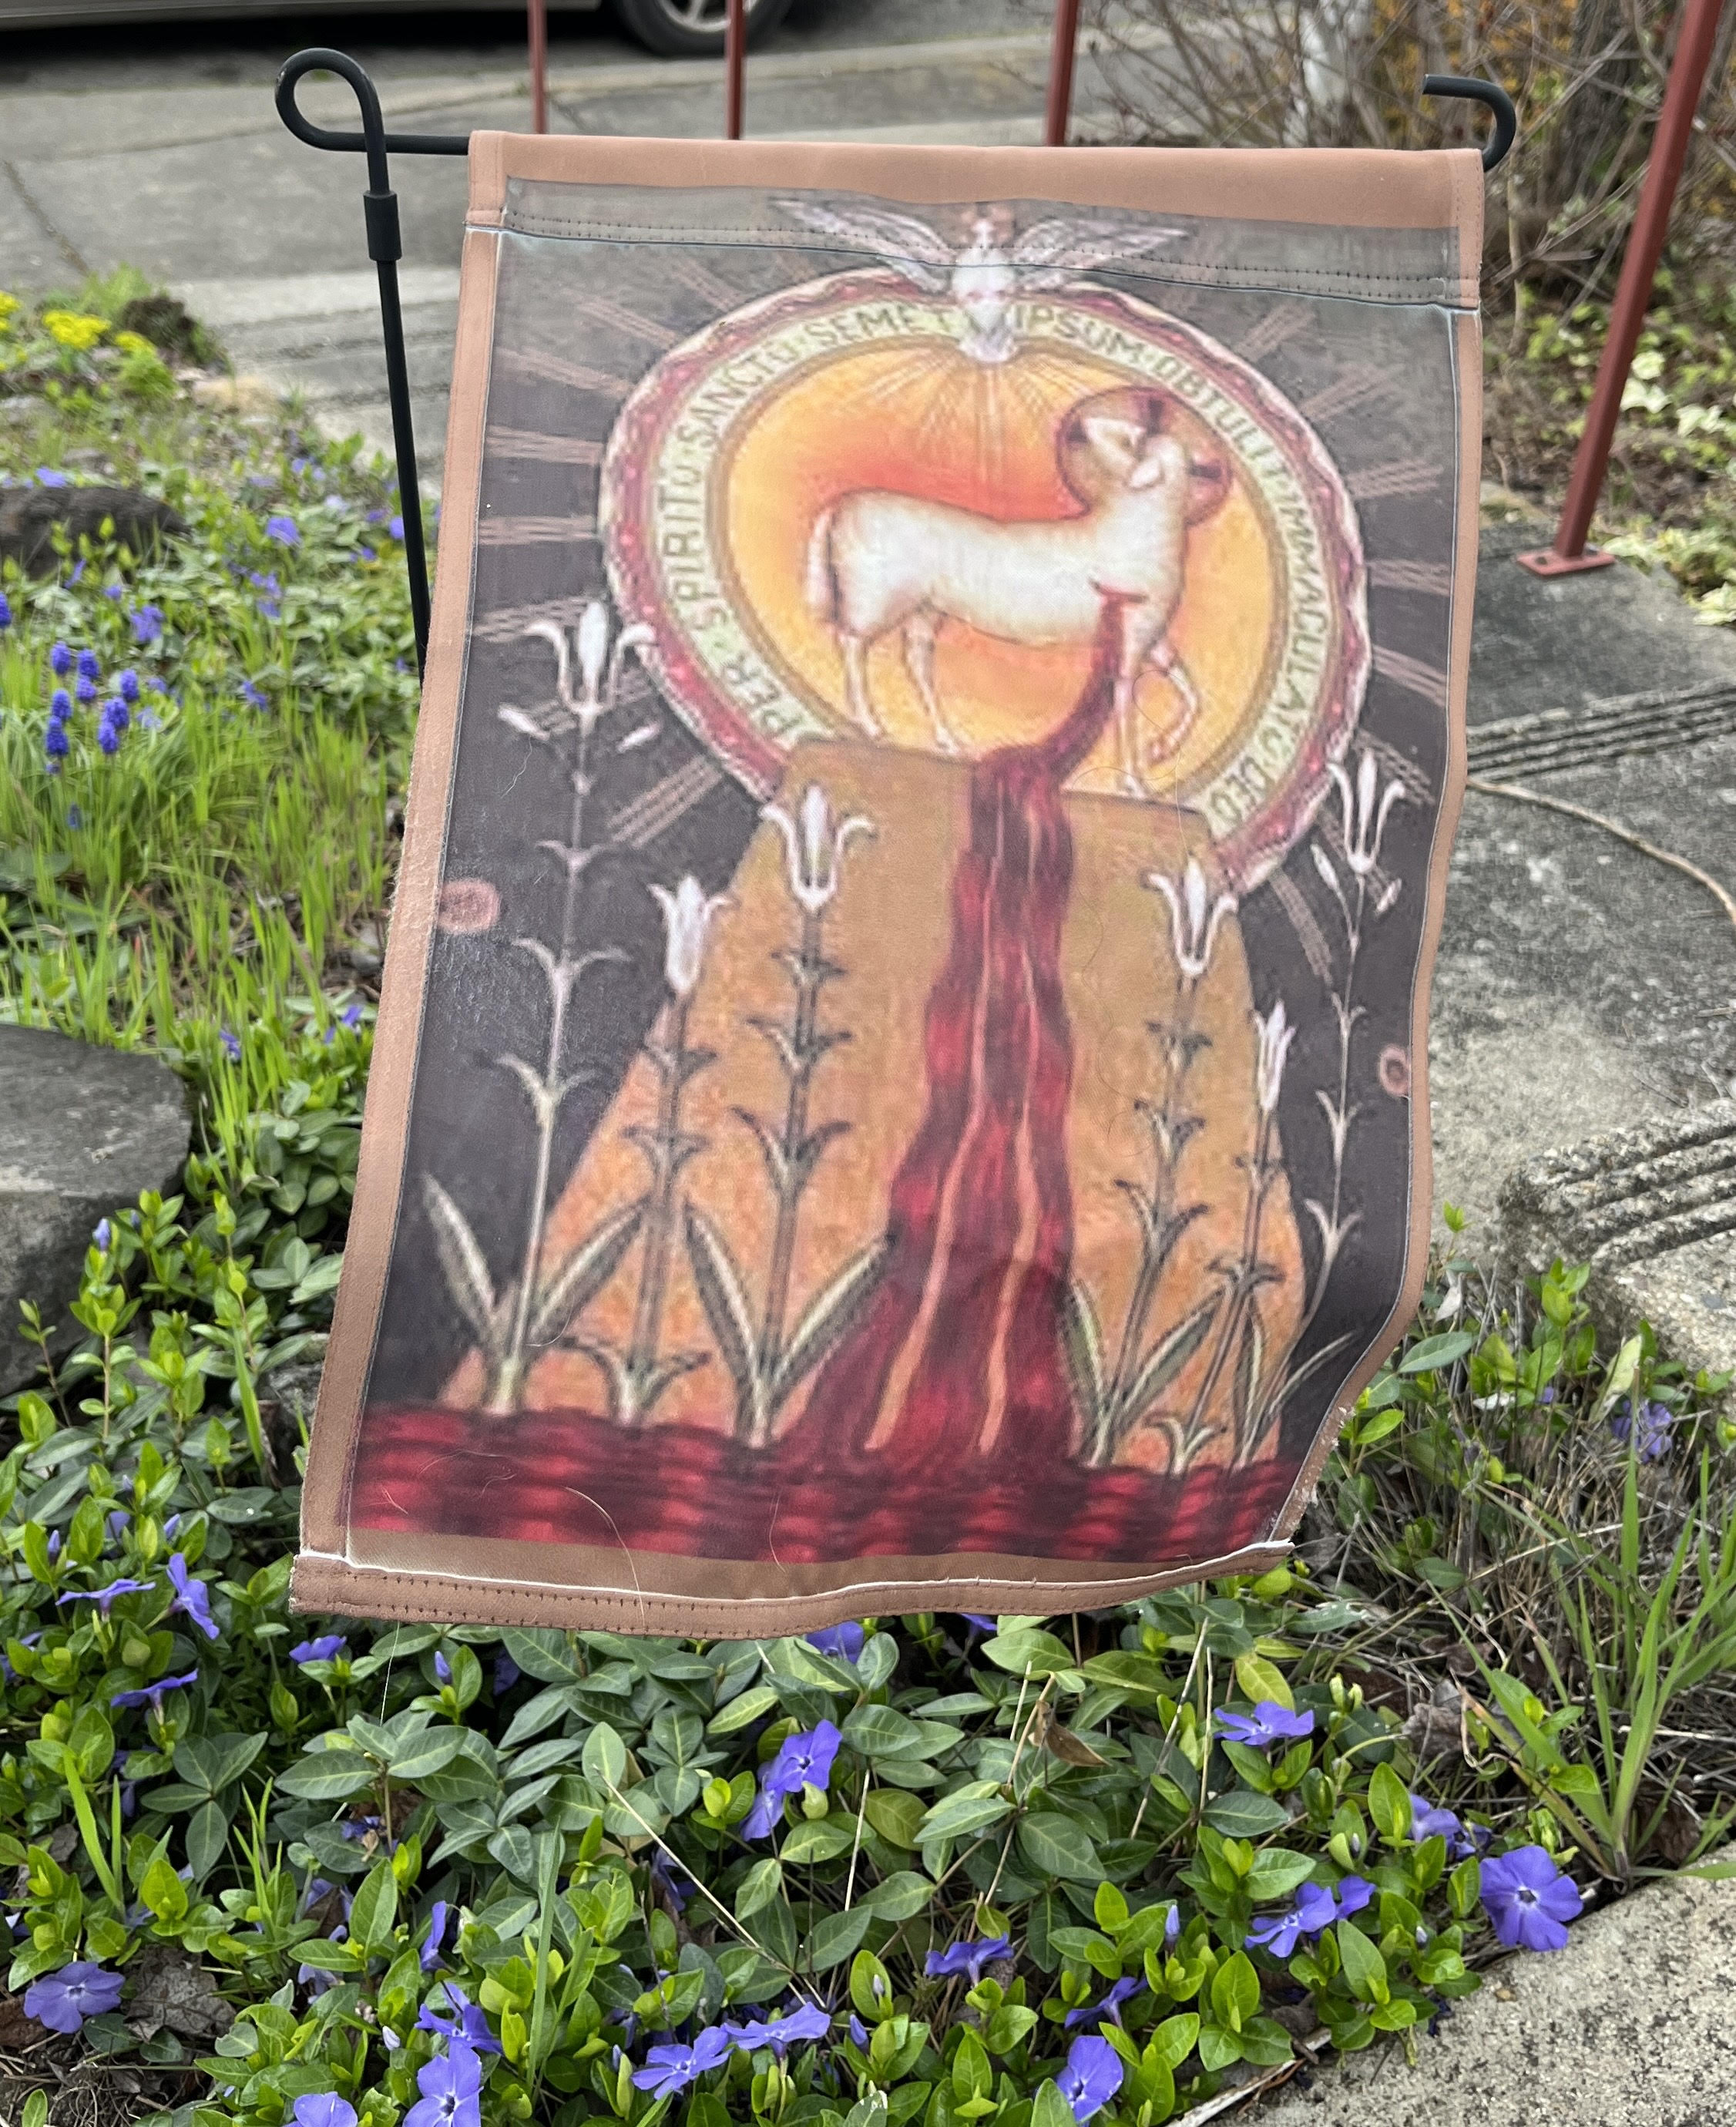 A picture of a garden flag depicting a sacrificial lamb bleeding on an altar with some Latin words, representing Jesus